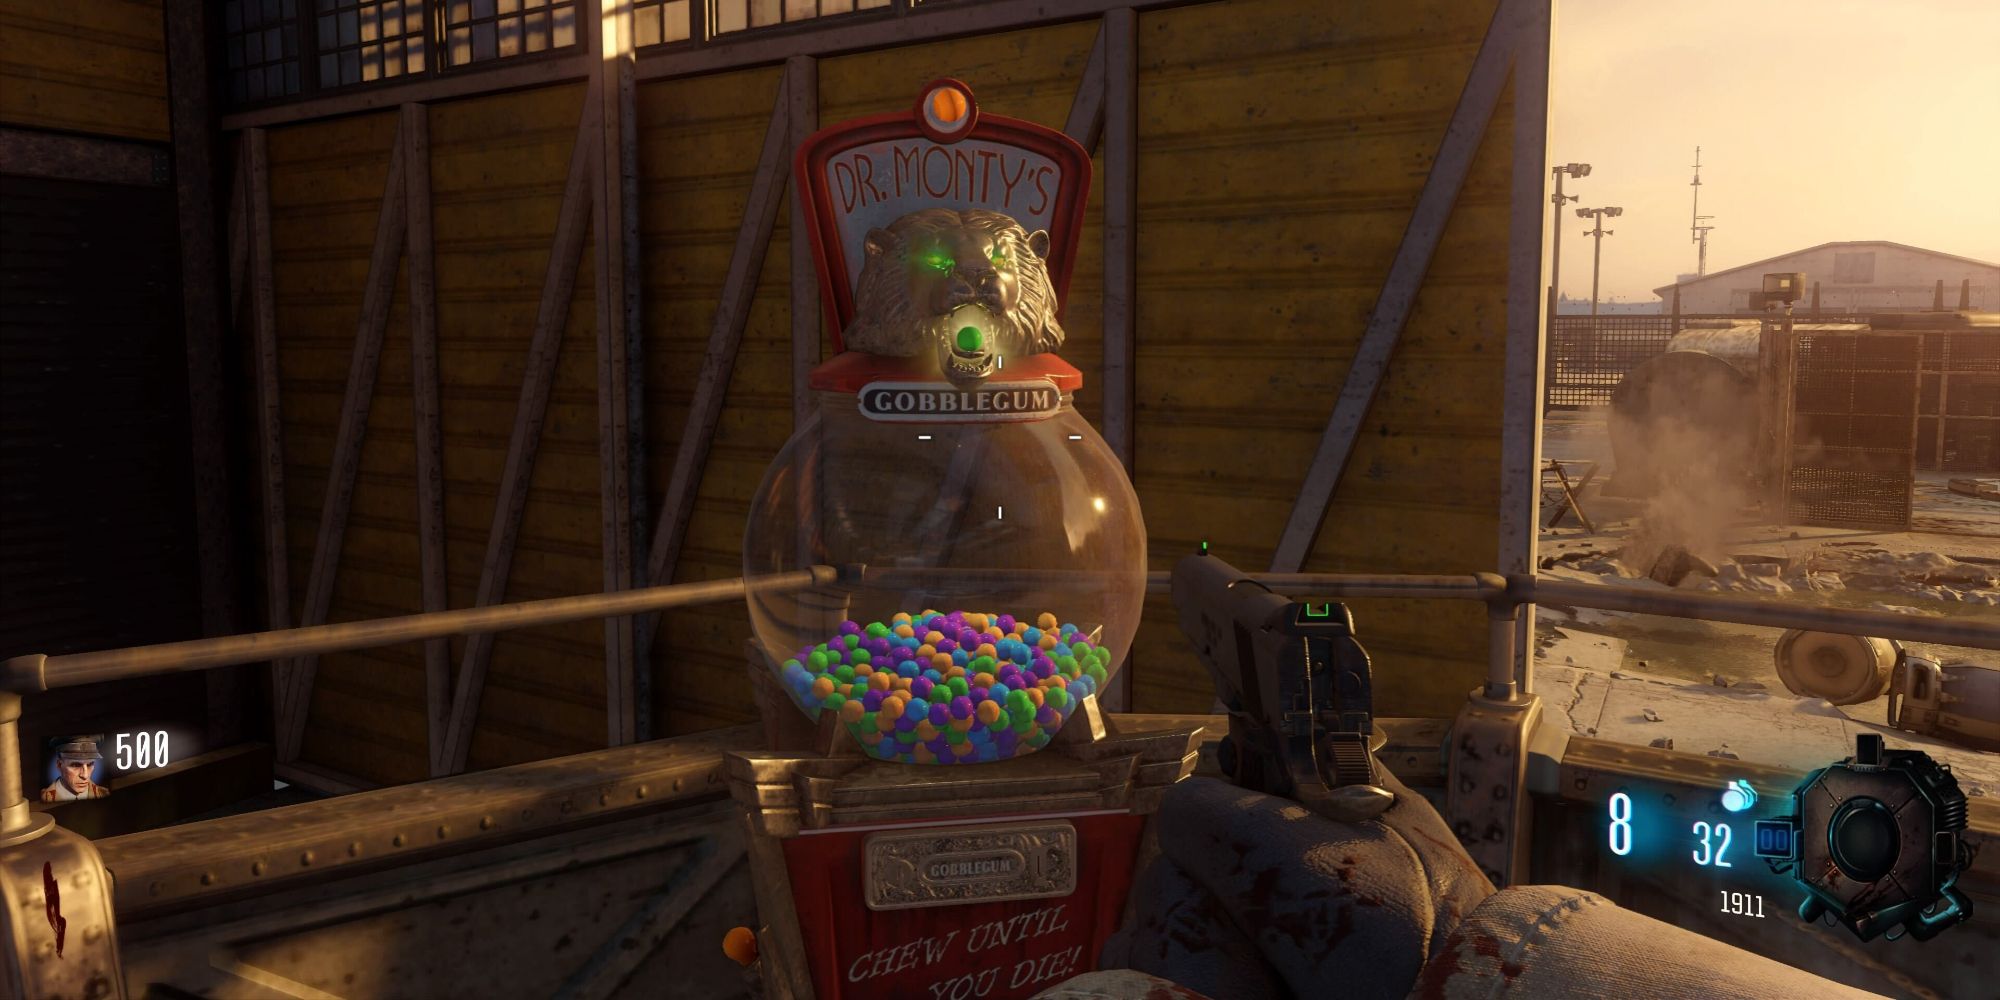 Gameplay from Call Of Duty: Black Ops 3 Zombie mode, showing a Gobblegum dispenser on the Moon map